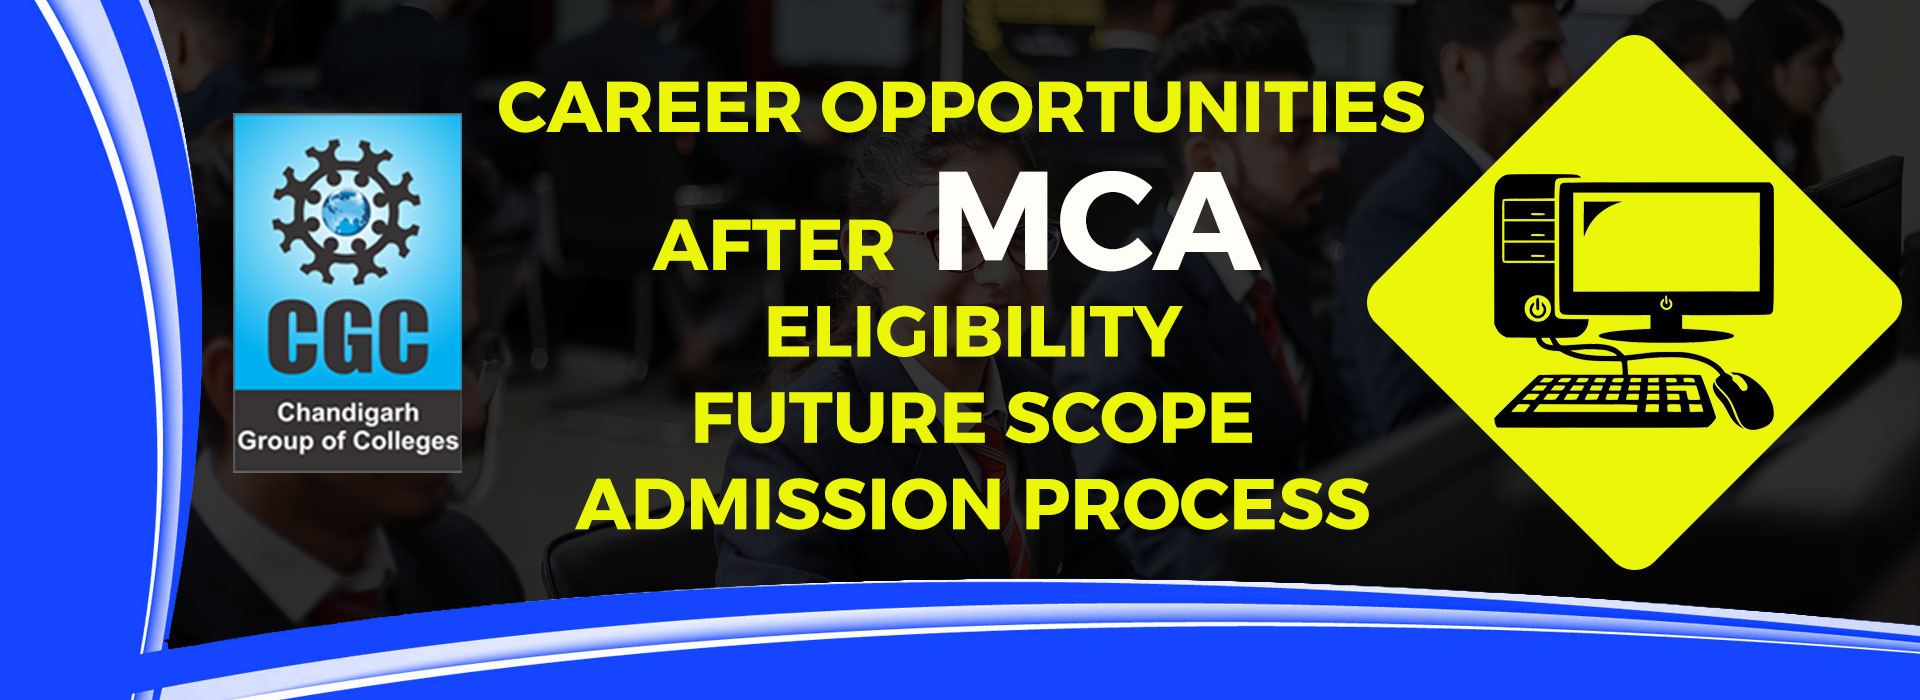 Career Opportunities after MCA: Eligibility, Future Scope, Admission Process 